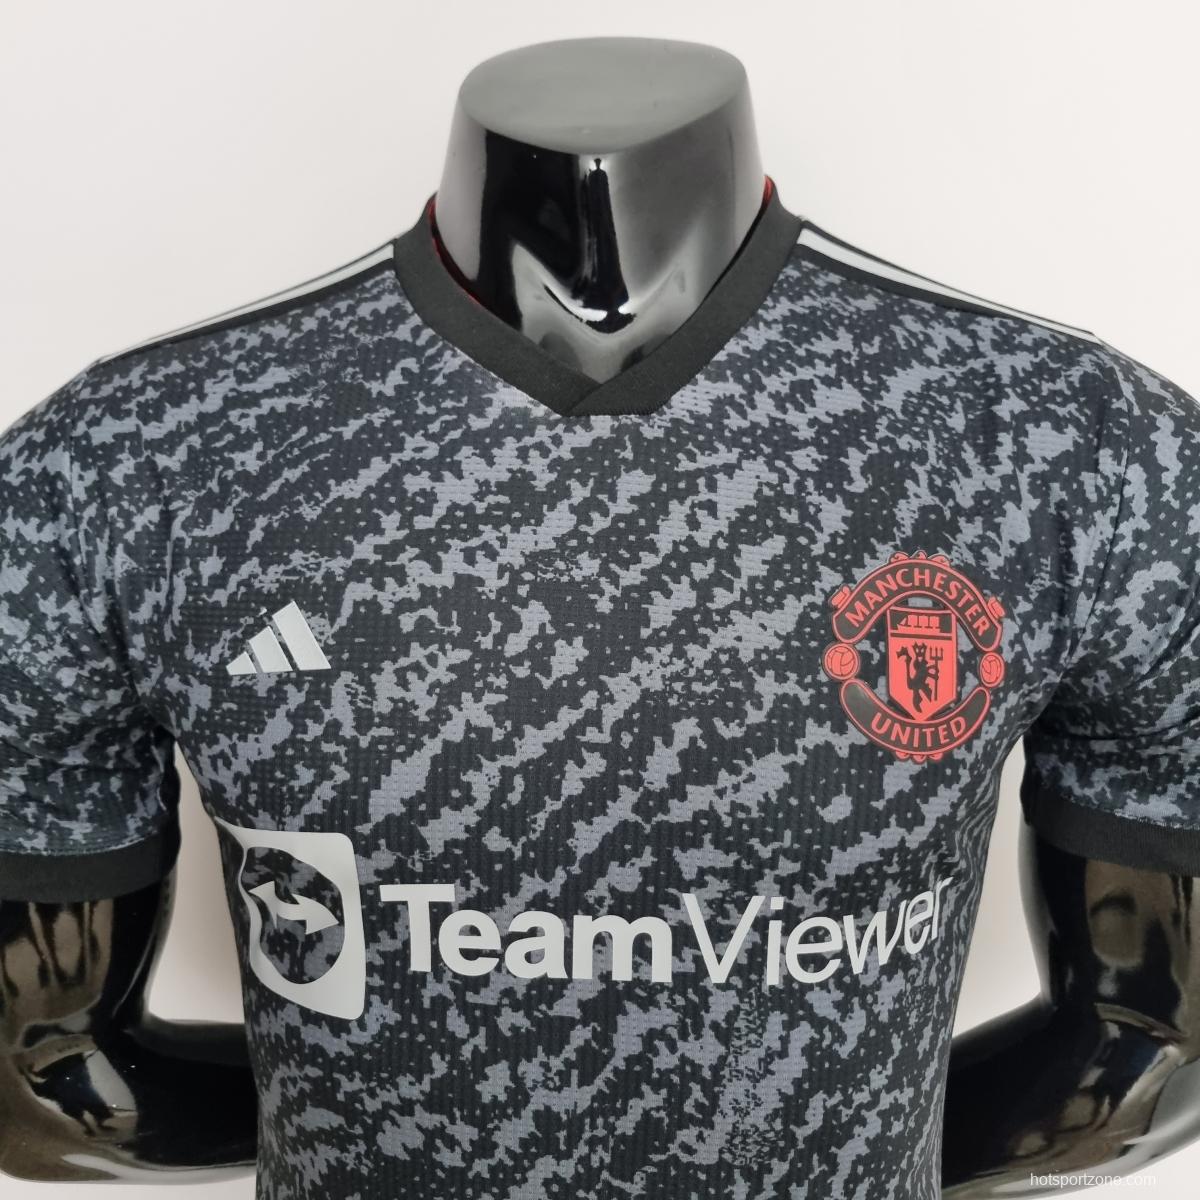 22/23 player version Manchester United Special Edition Soccer Jersey